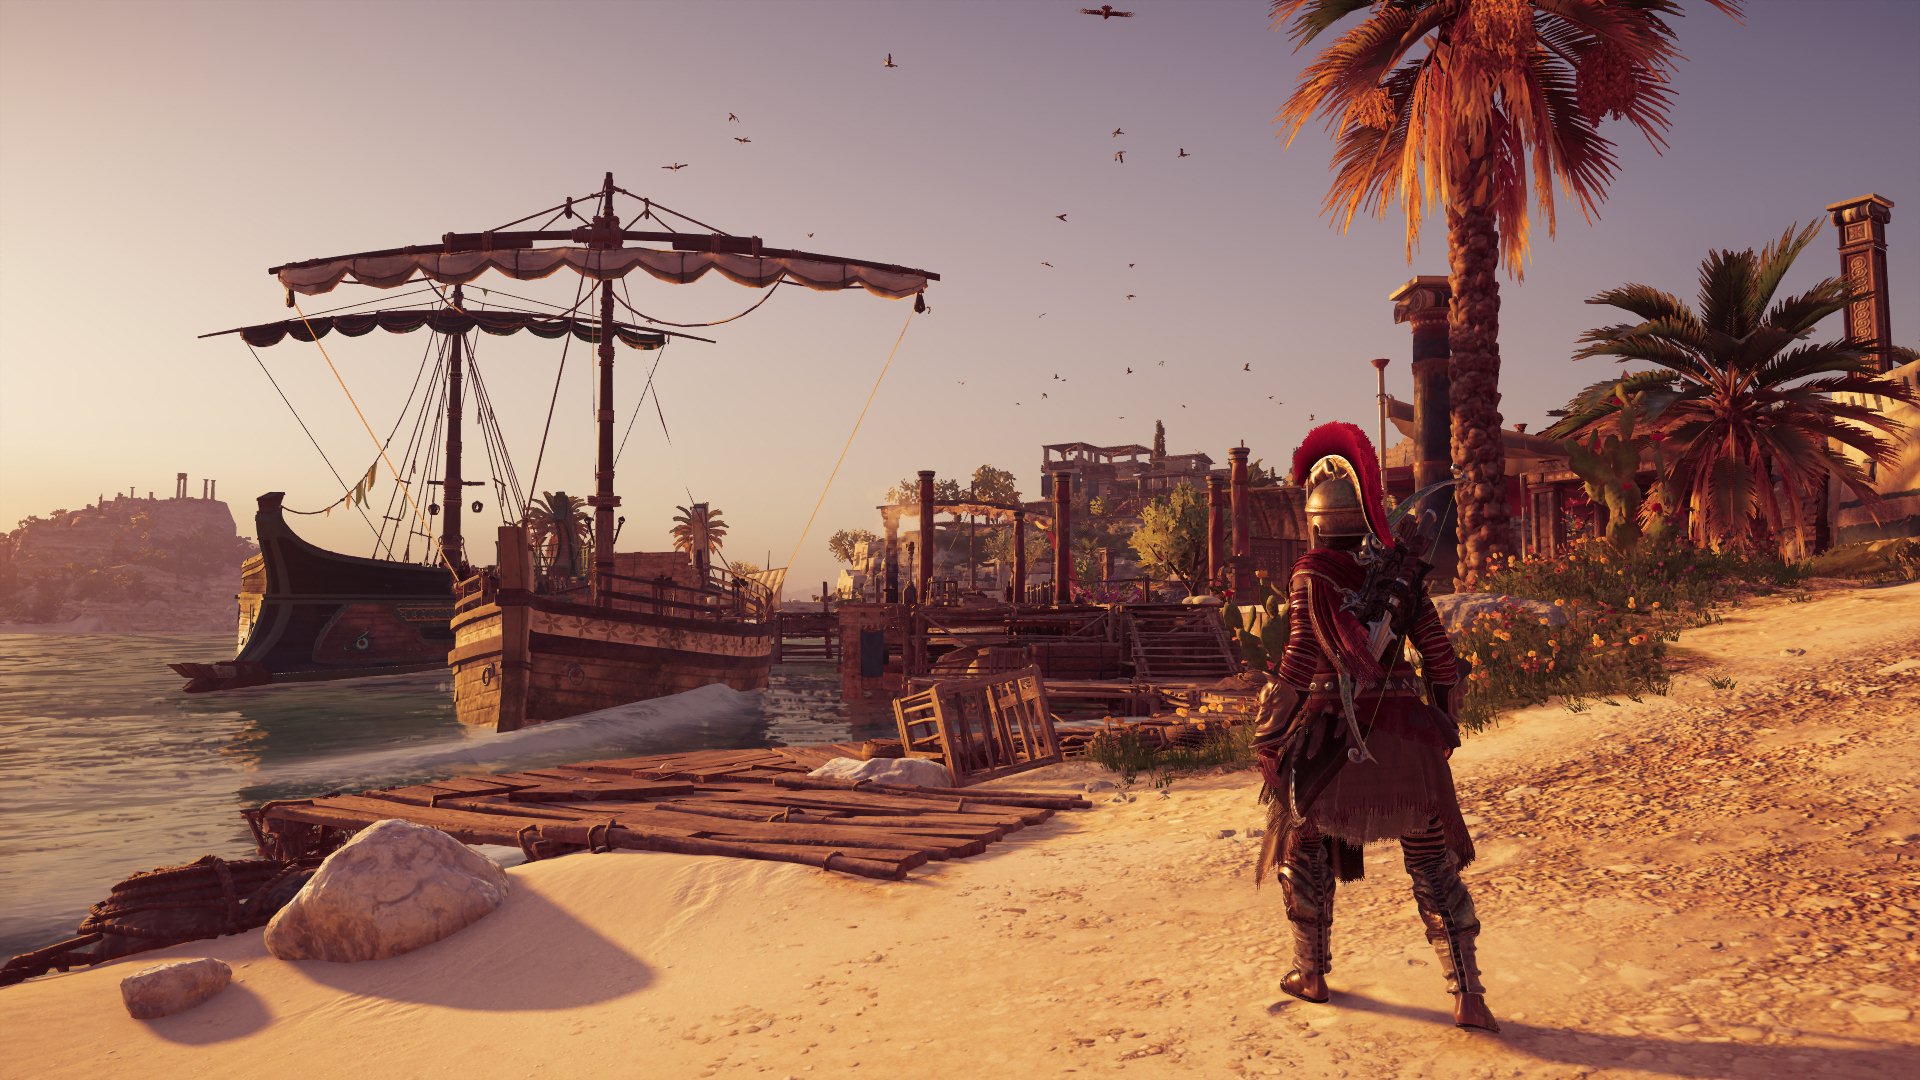 Assassin Creed Odyssey Assassins Creed Video Games PC Gaming Screen Shot 1920x1080